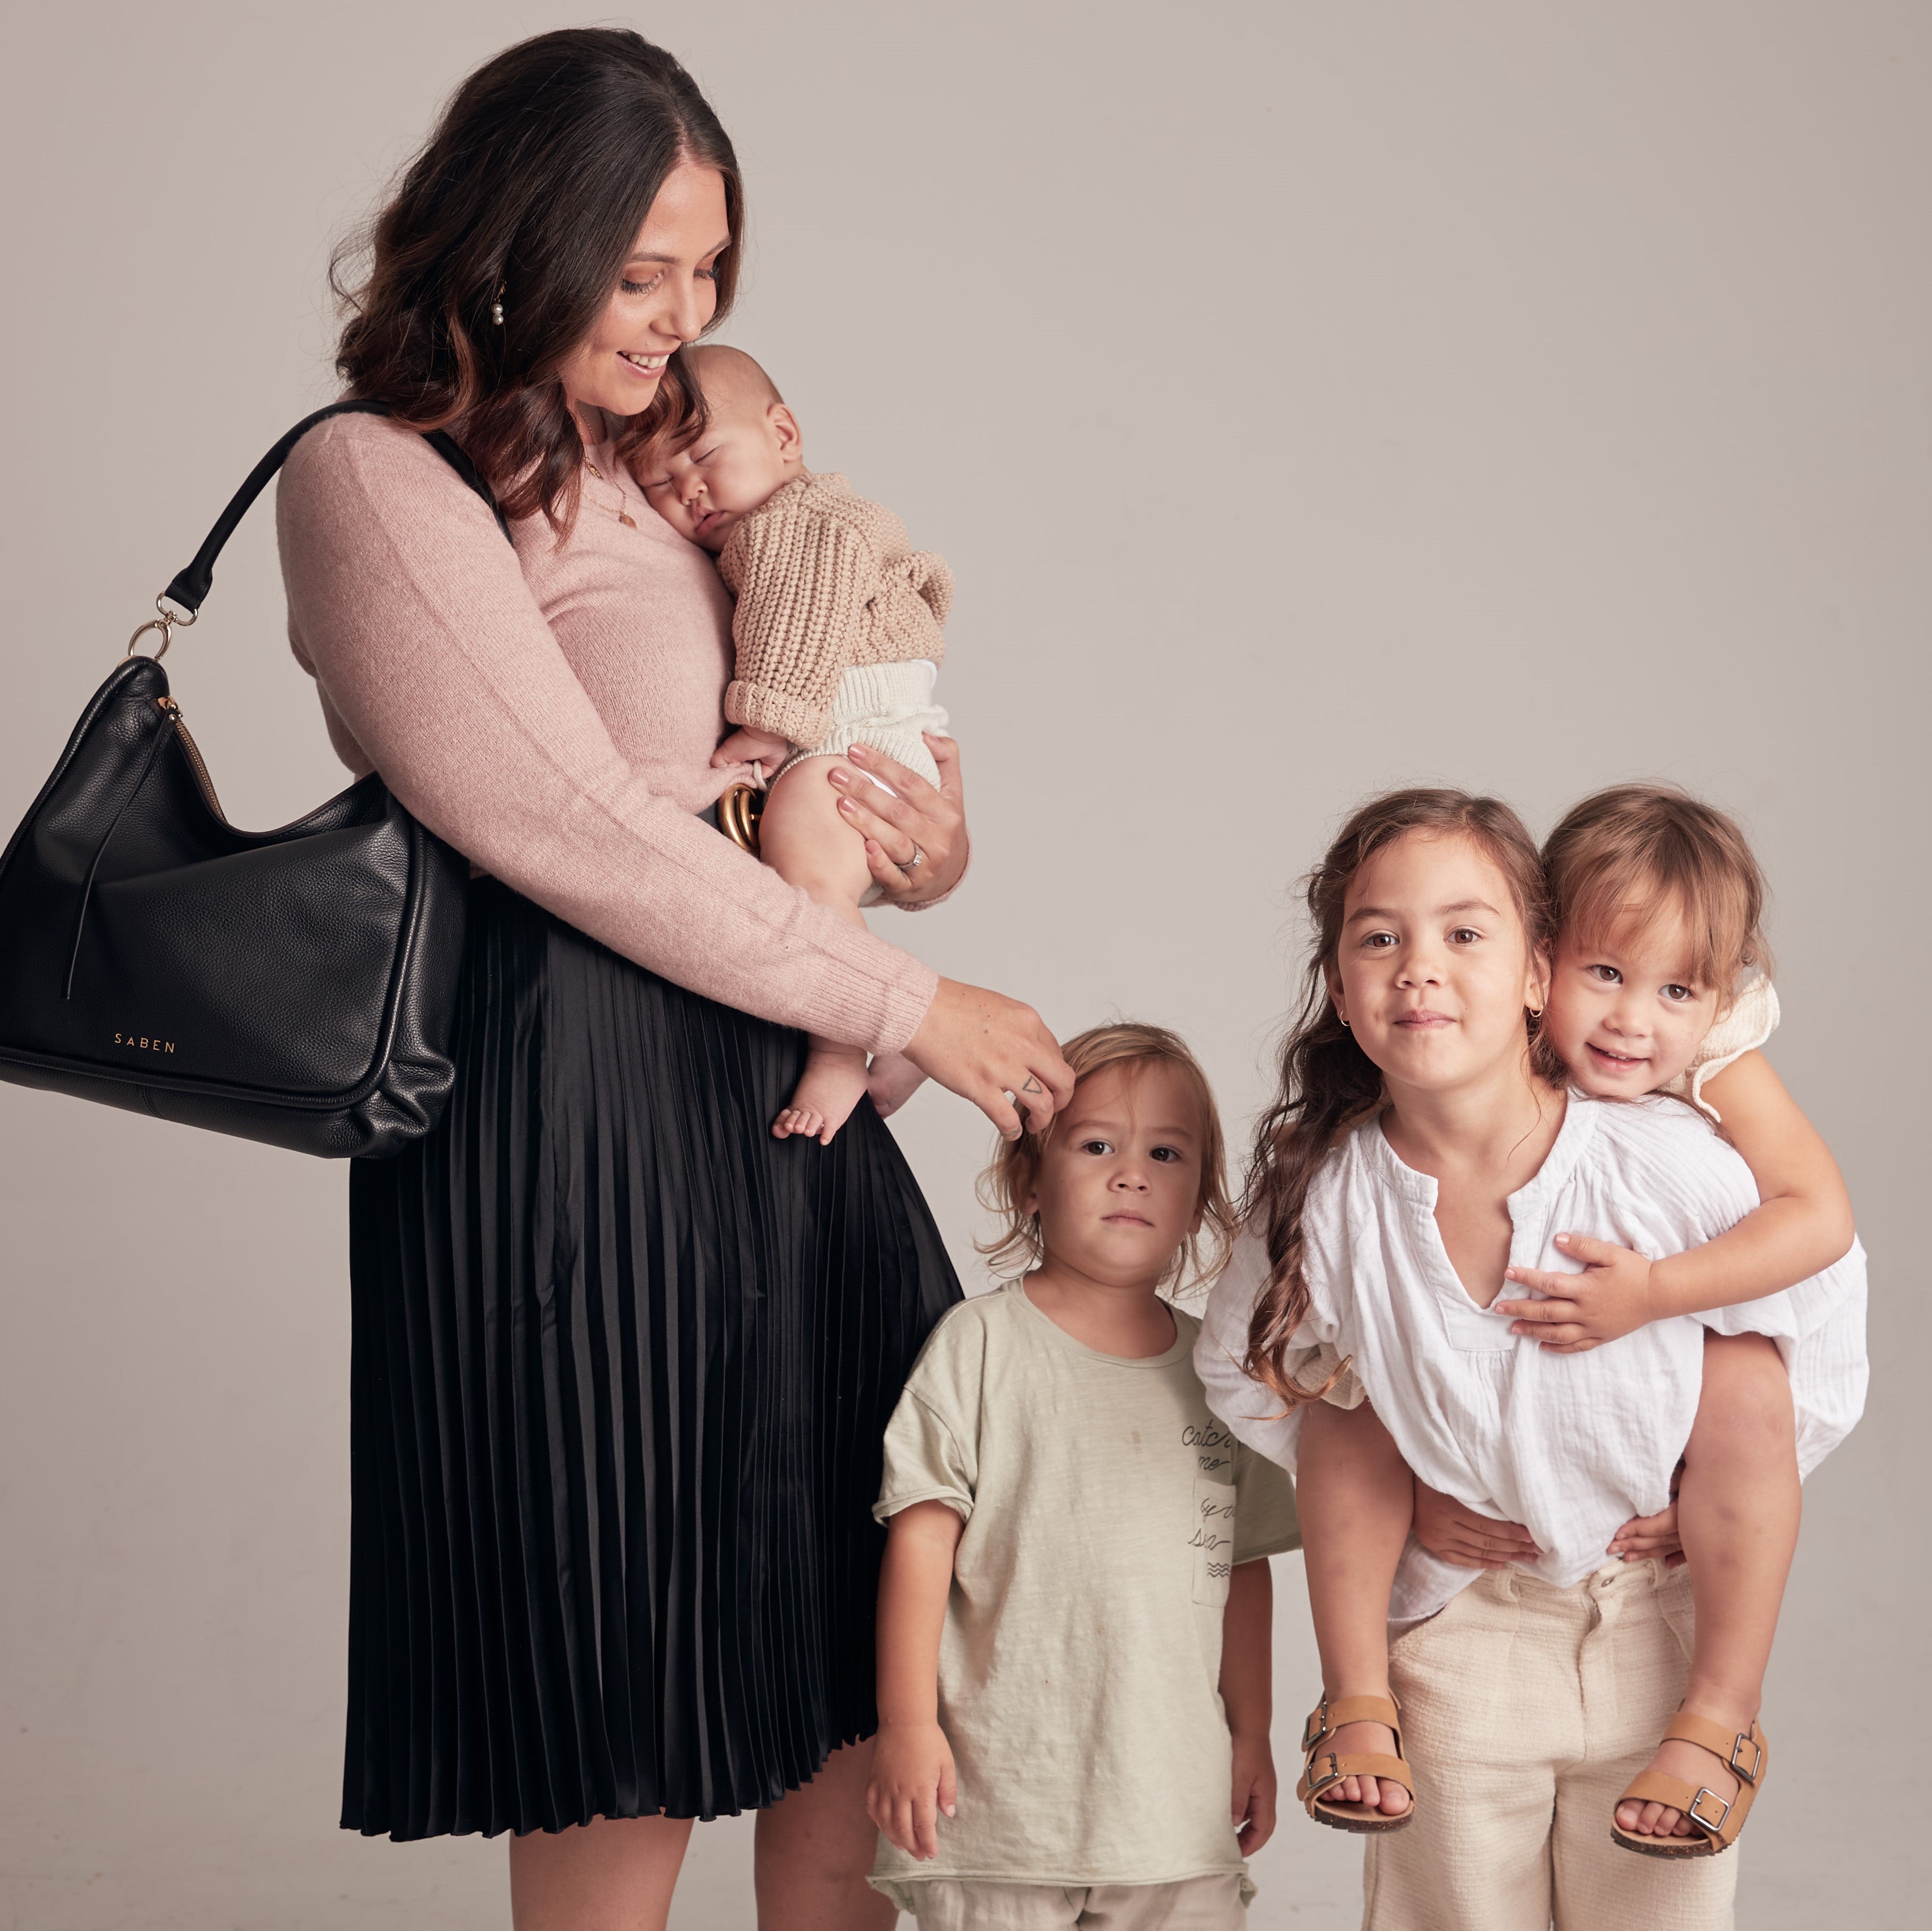 Stephanie Peeni for Saben Mothers Day collection